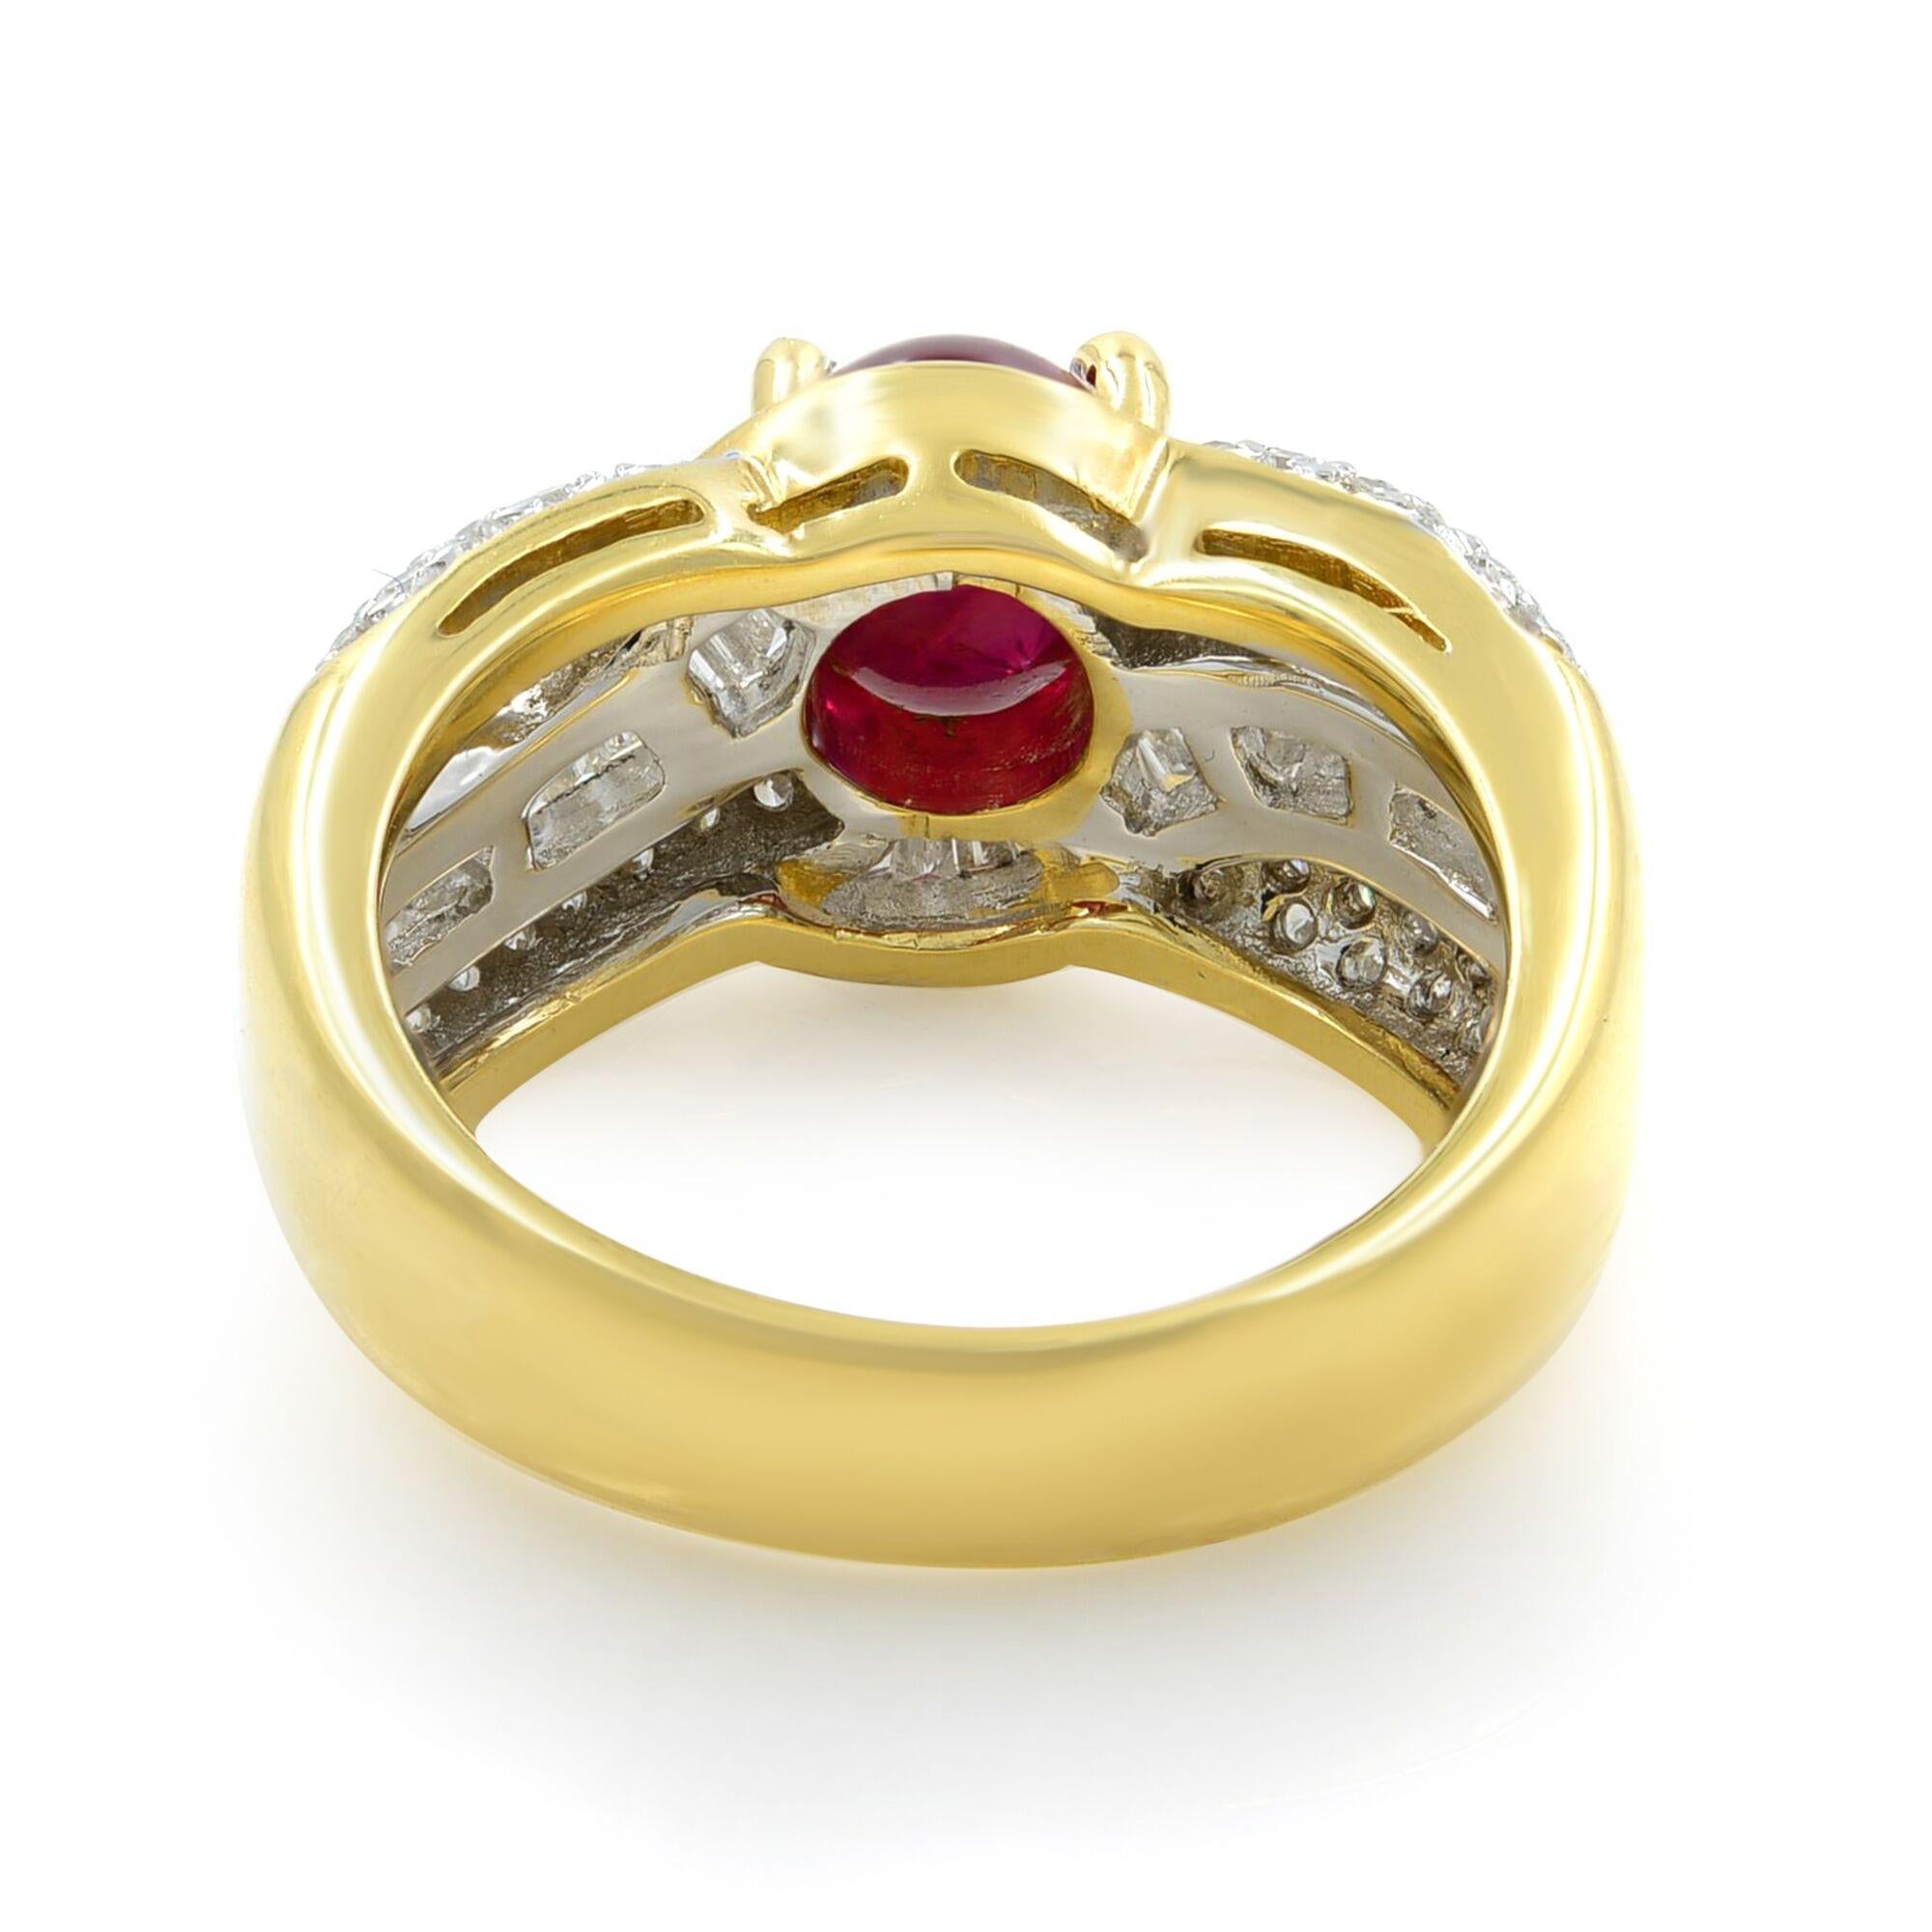 A ravishing, rich cherry red oval-cut ruby, weighing 2.48carats, radiates between of bright baguette diamonds and rows of smaller seamlessly-set further embellished on the sides with round brilliant-cut diamonds, in this classic high-quality estate